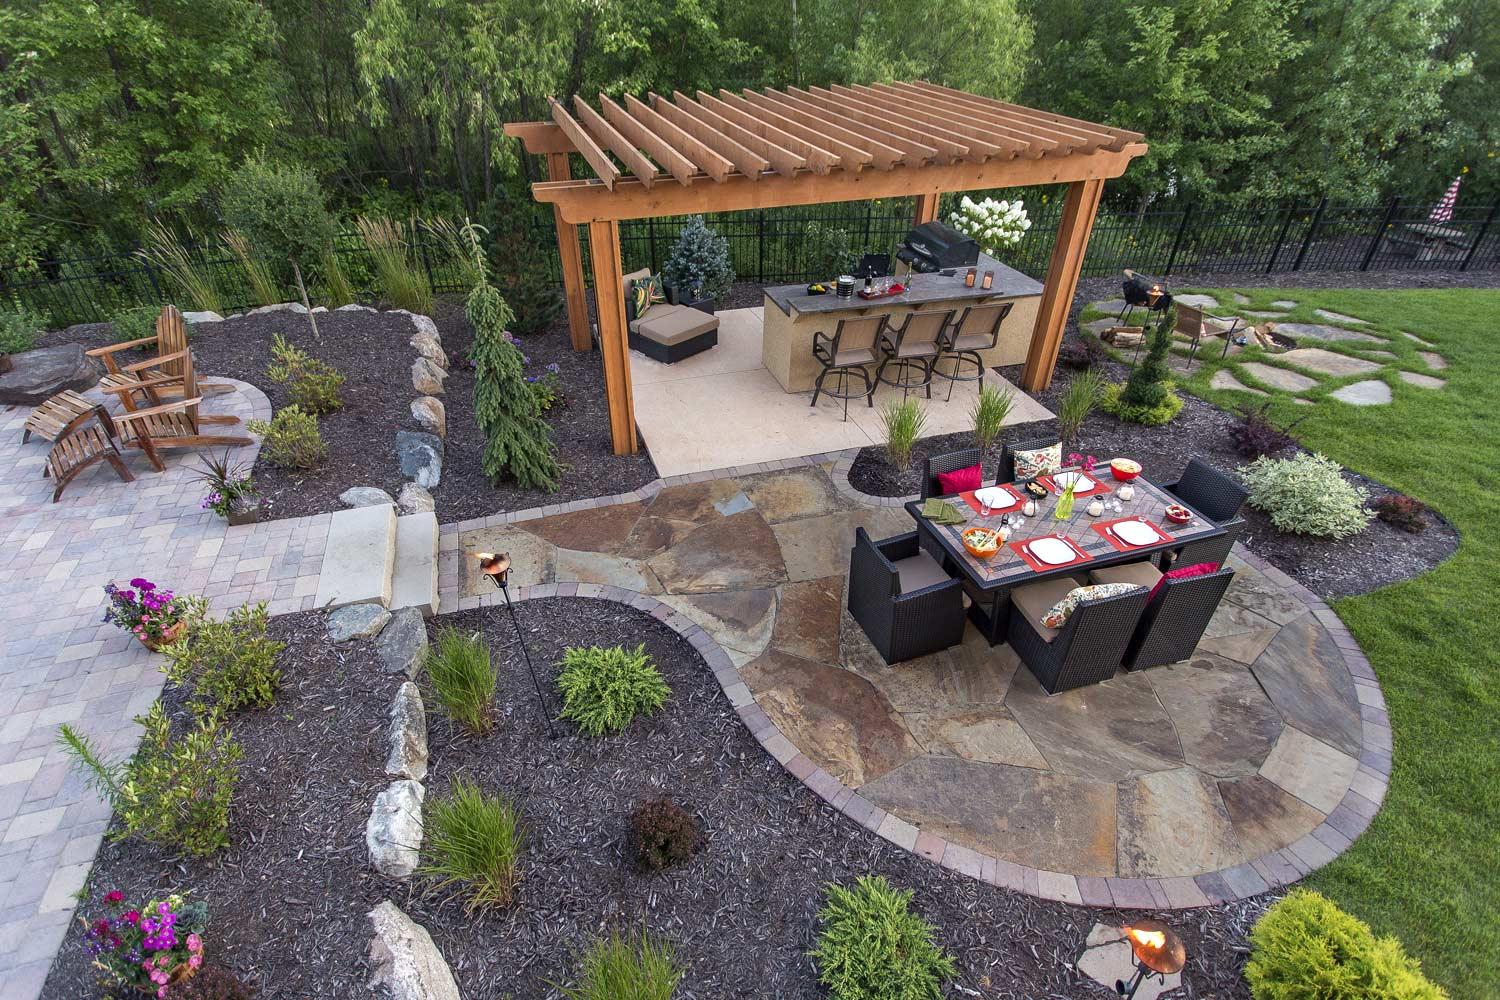 multiple patios and hardscape and structures create outdoor living rooms minneapolis,mn